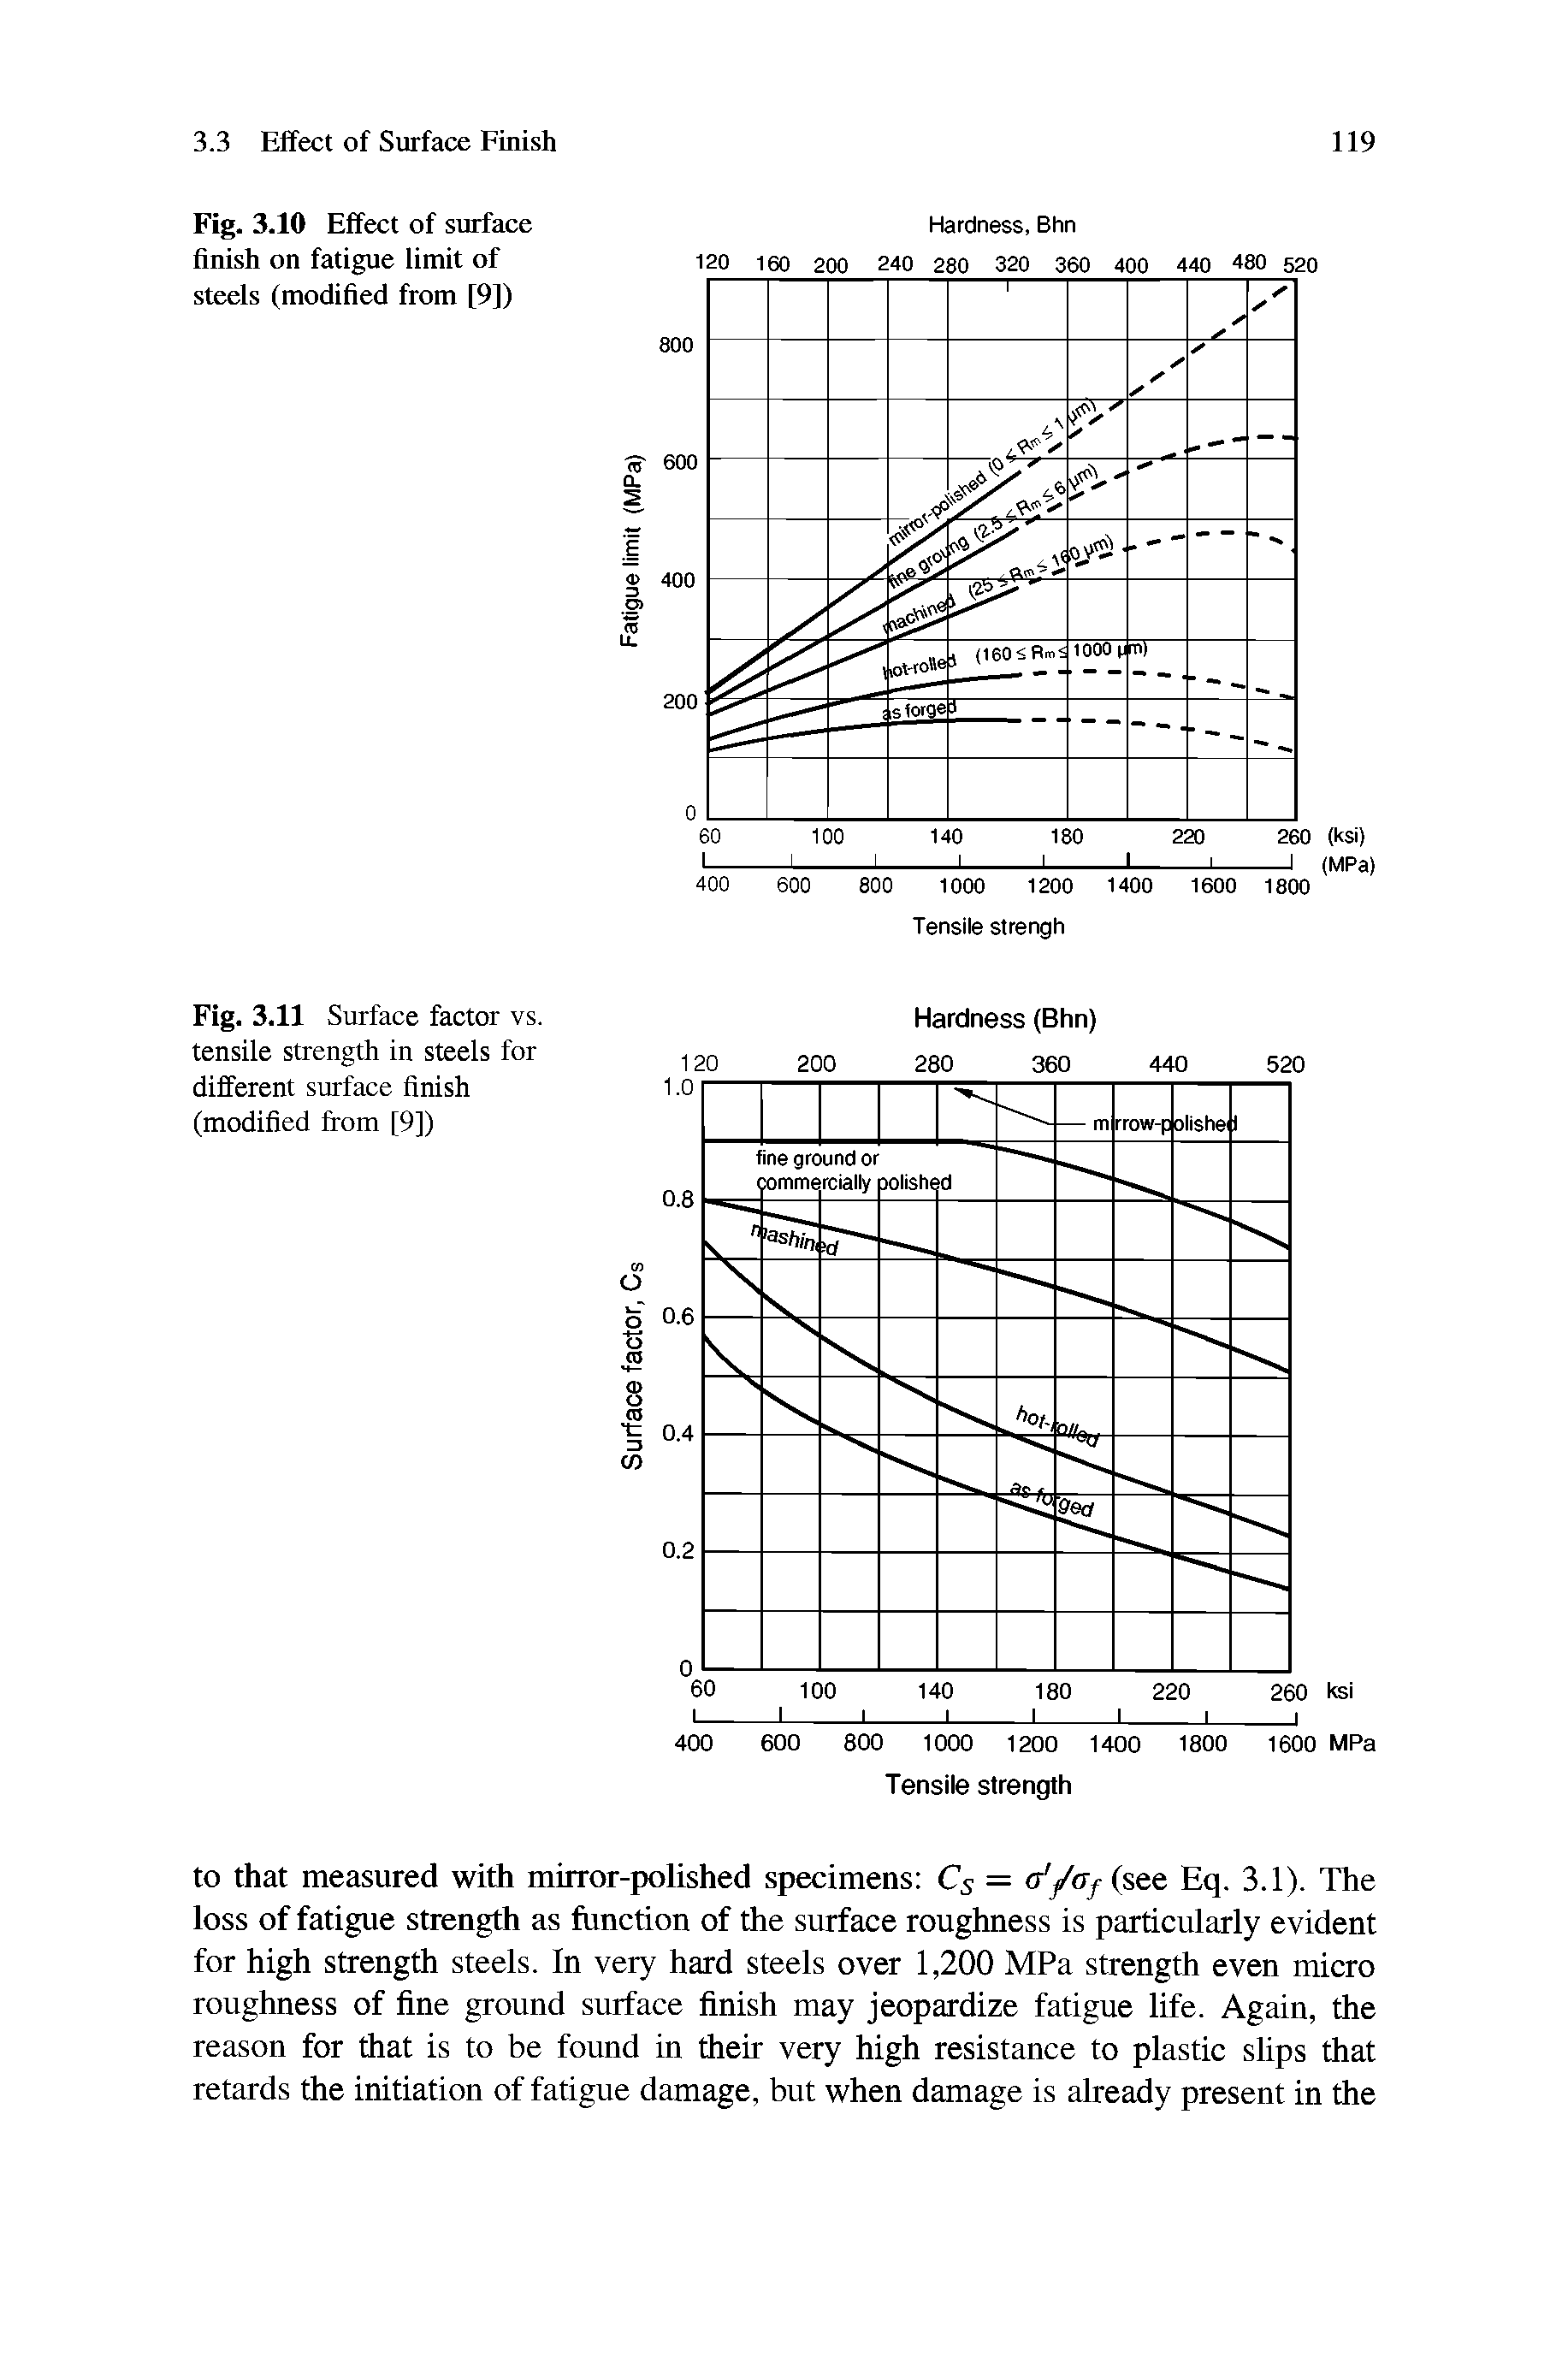 Fig. 3.10 Effect of surface finish on fatigue limit of steels (modified from [9])...